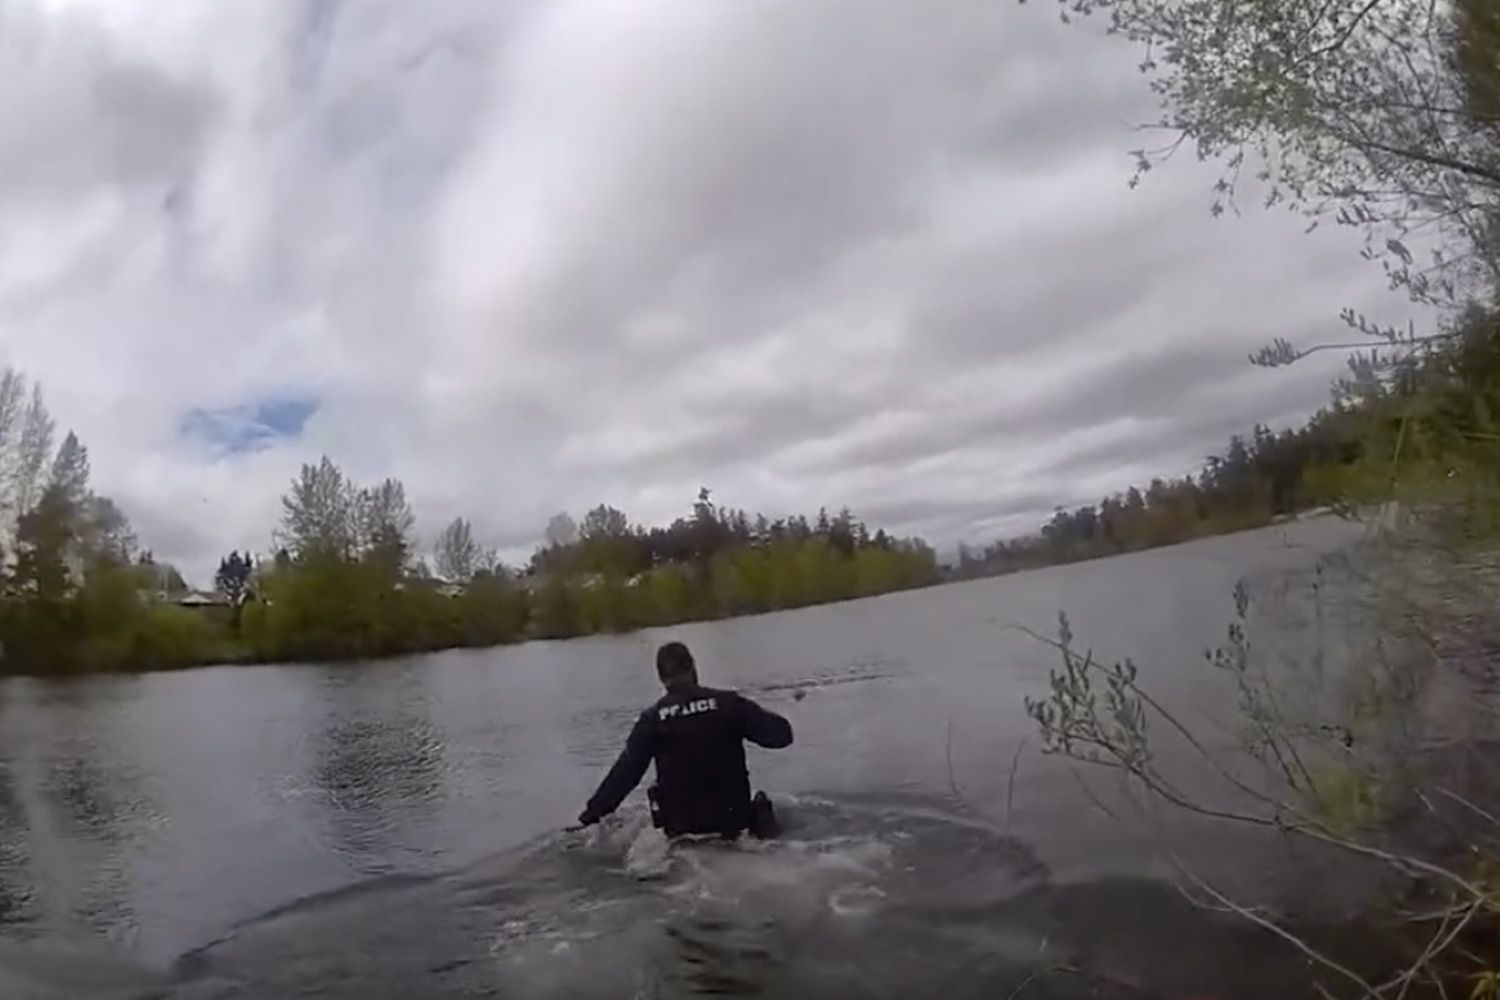  Washington Officers Jump Into Freezing Lake to Save Teenager: 'We Get Trained to Just Act' 